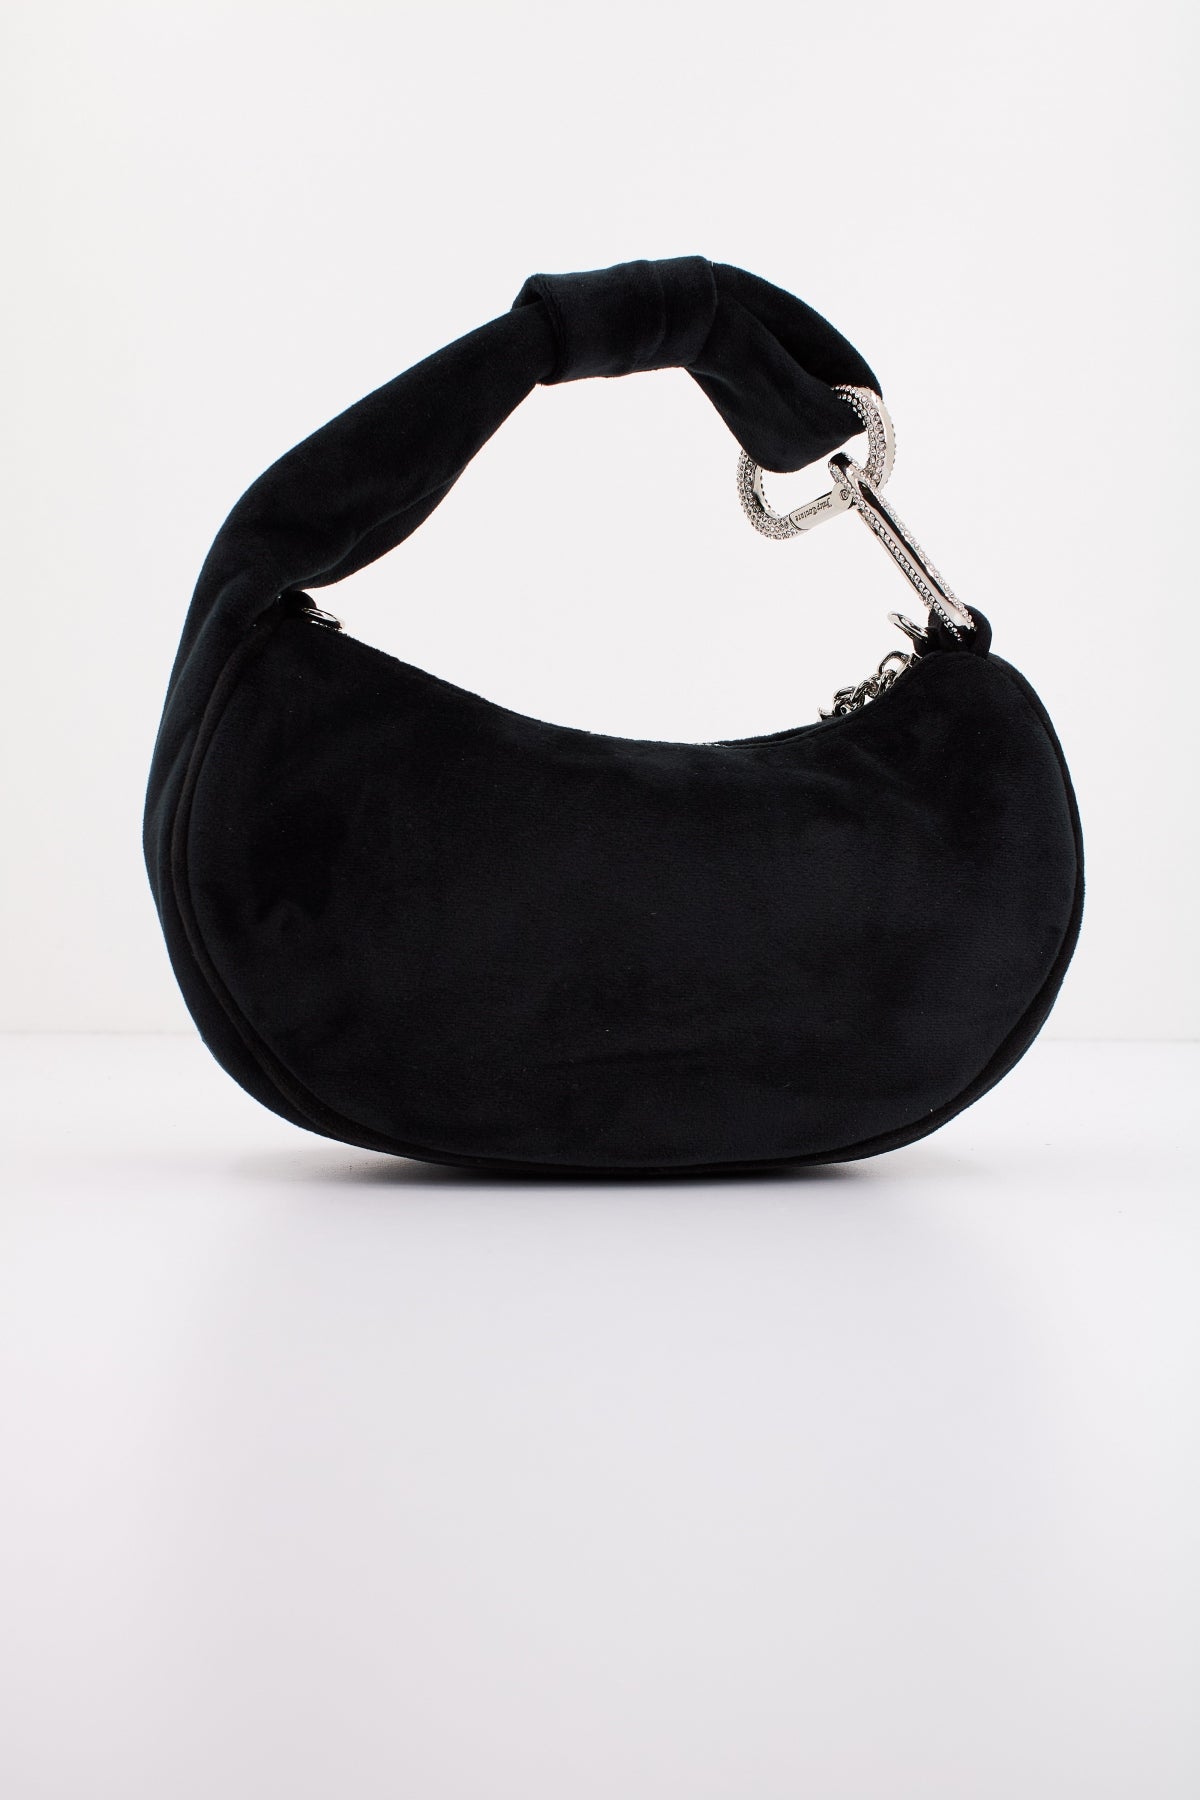 JUICY COUTURE BLOSSOM SMALL HOBO en color NEGRO  (3)